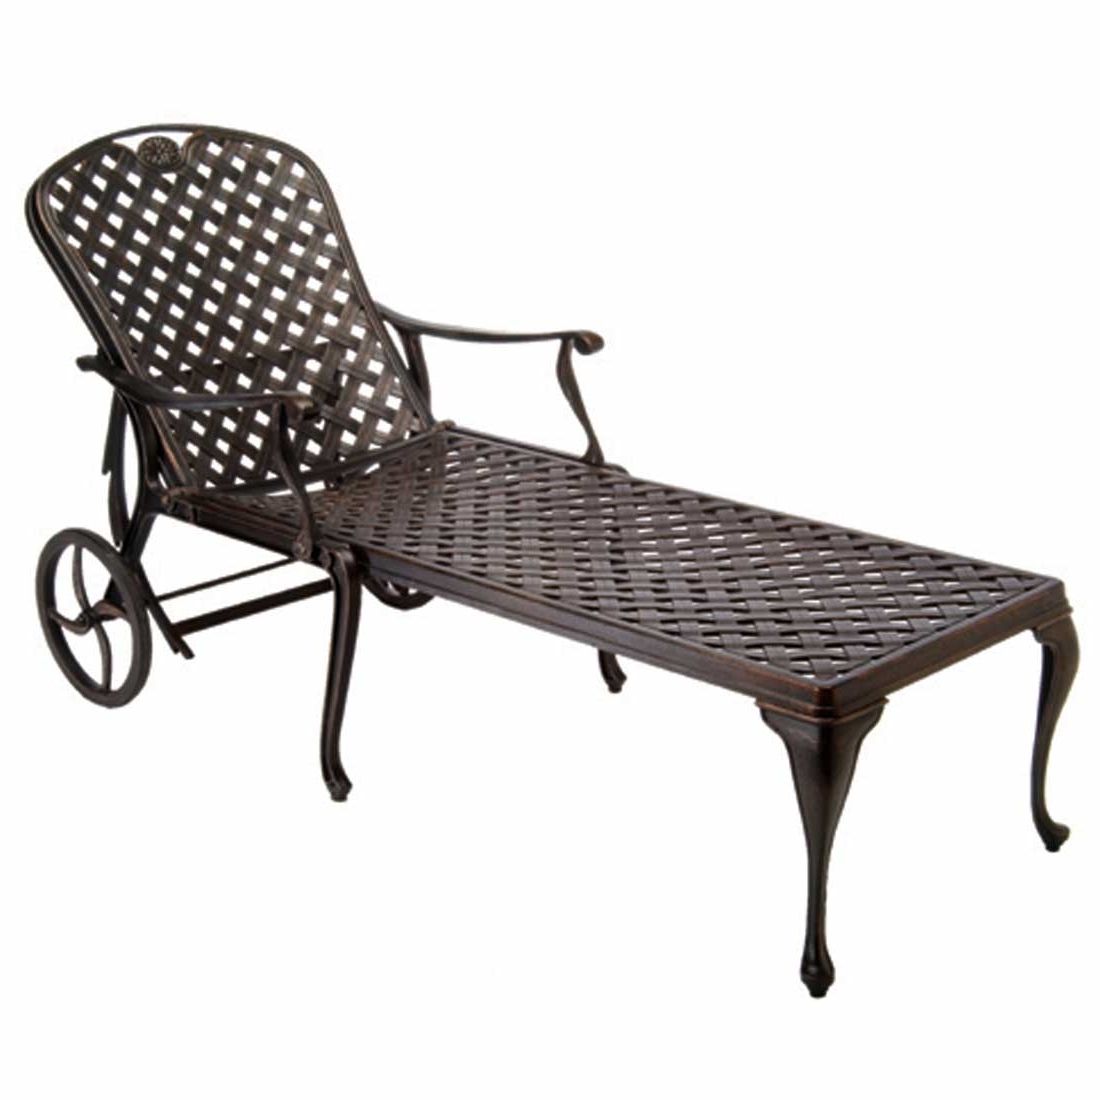 Provance Metal Chaise Lounge Chairs With Regard To Fashionable Iron Chaise Lounges (Photo 2 of 15)